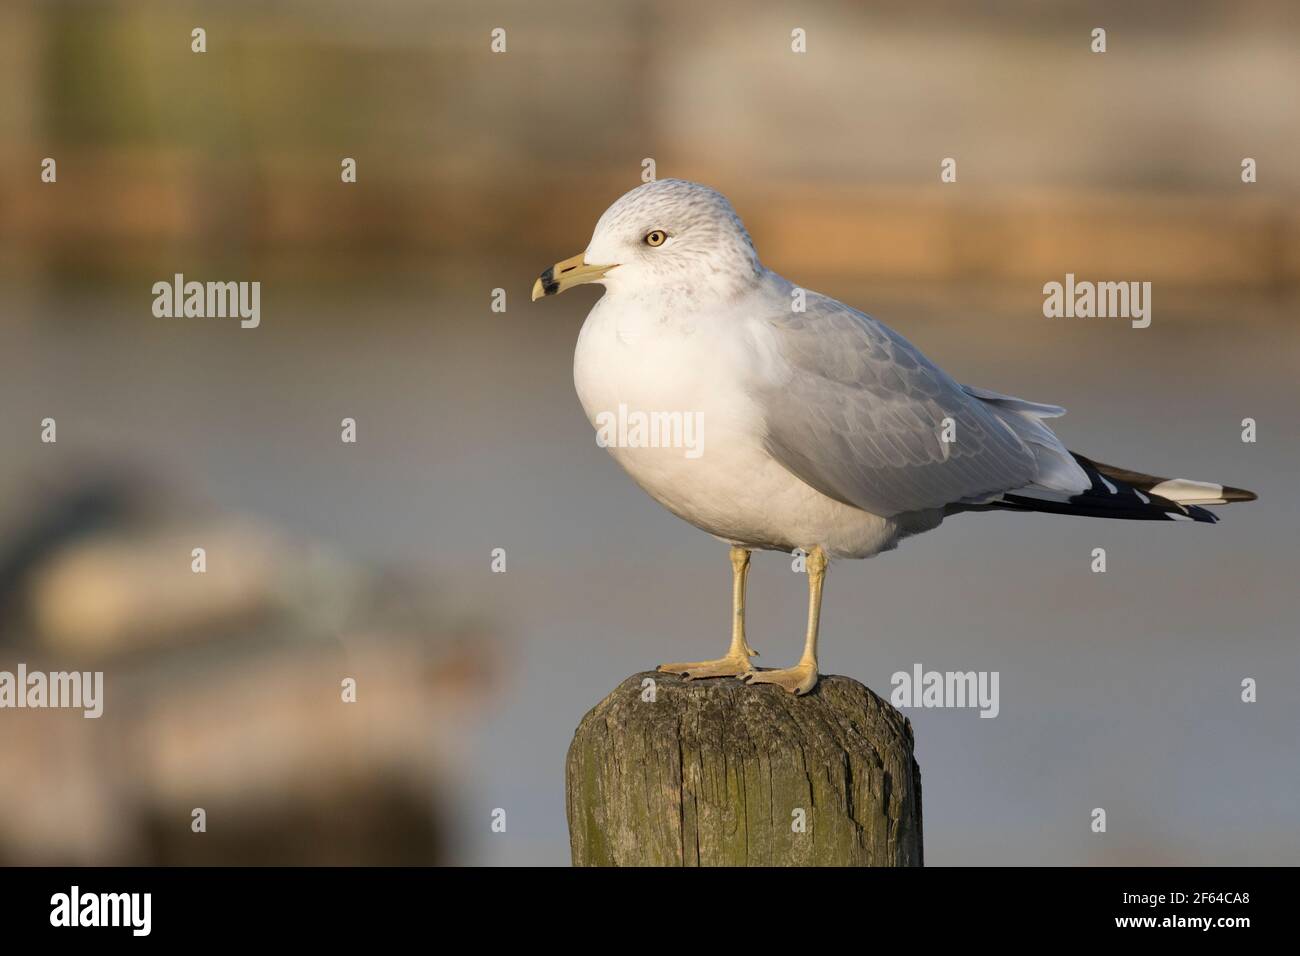 Non-breeding adult Ring-billed Gull (Larus delawarensis) perched on a piling in Long Island, New York Stock Photo